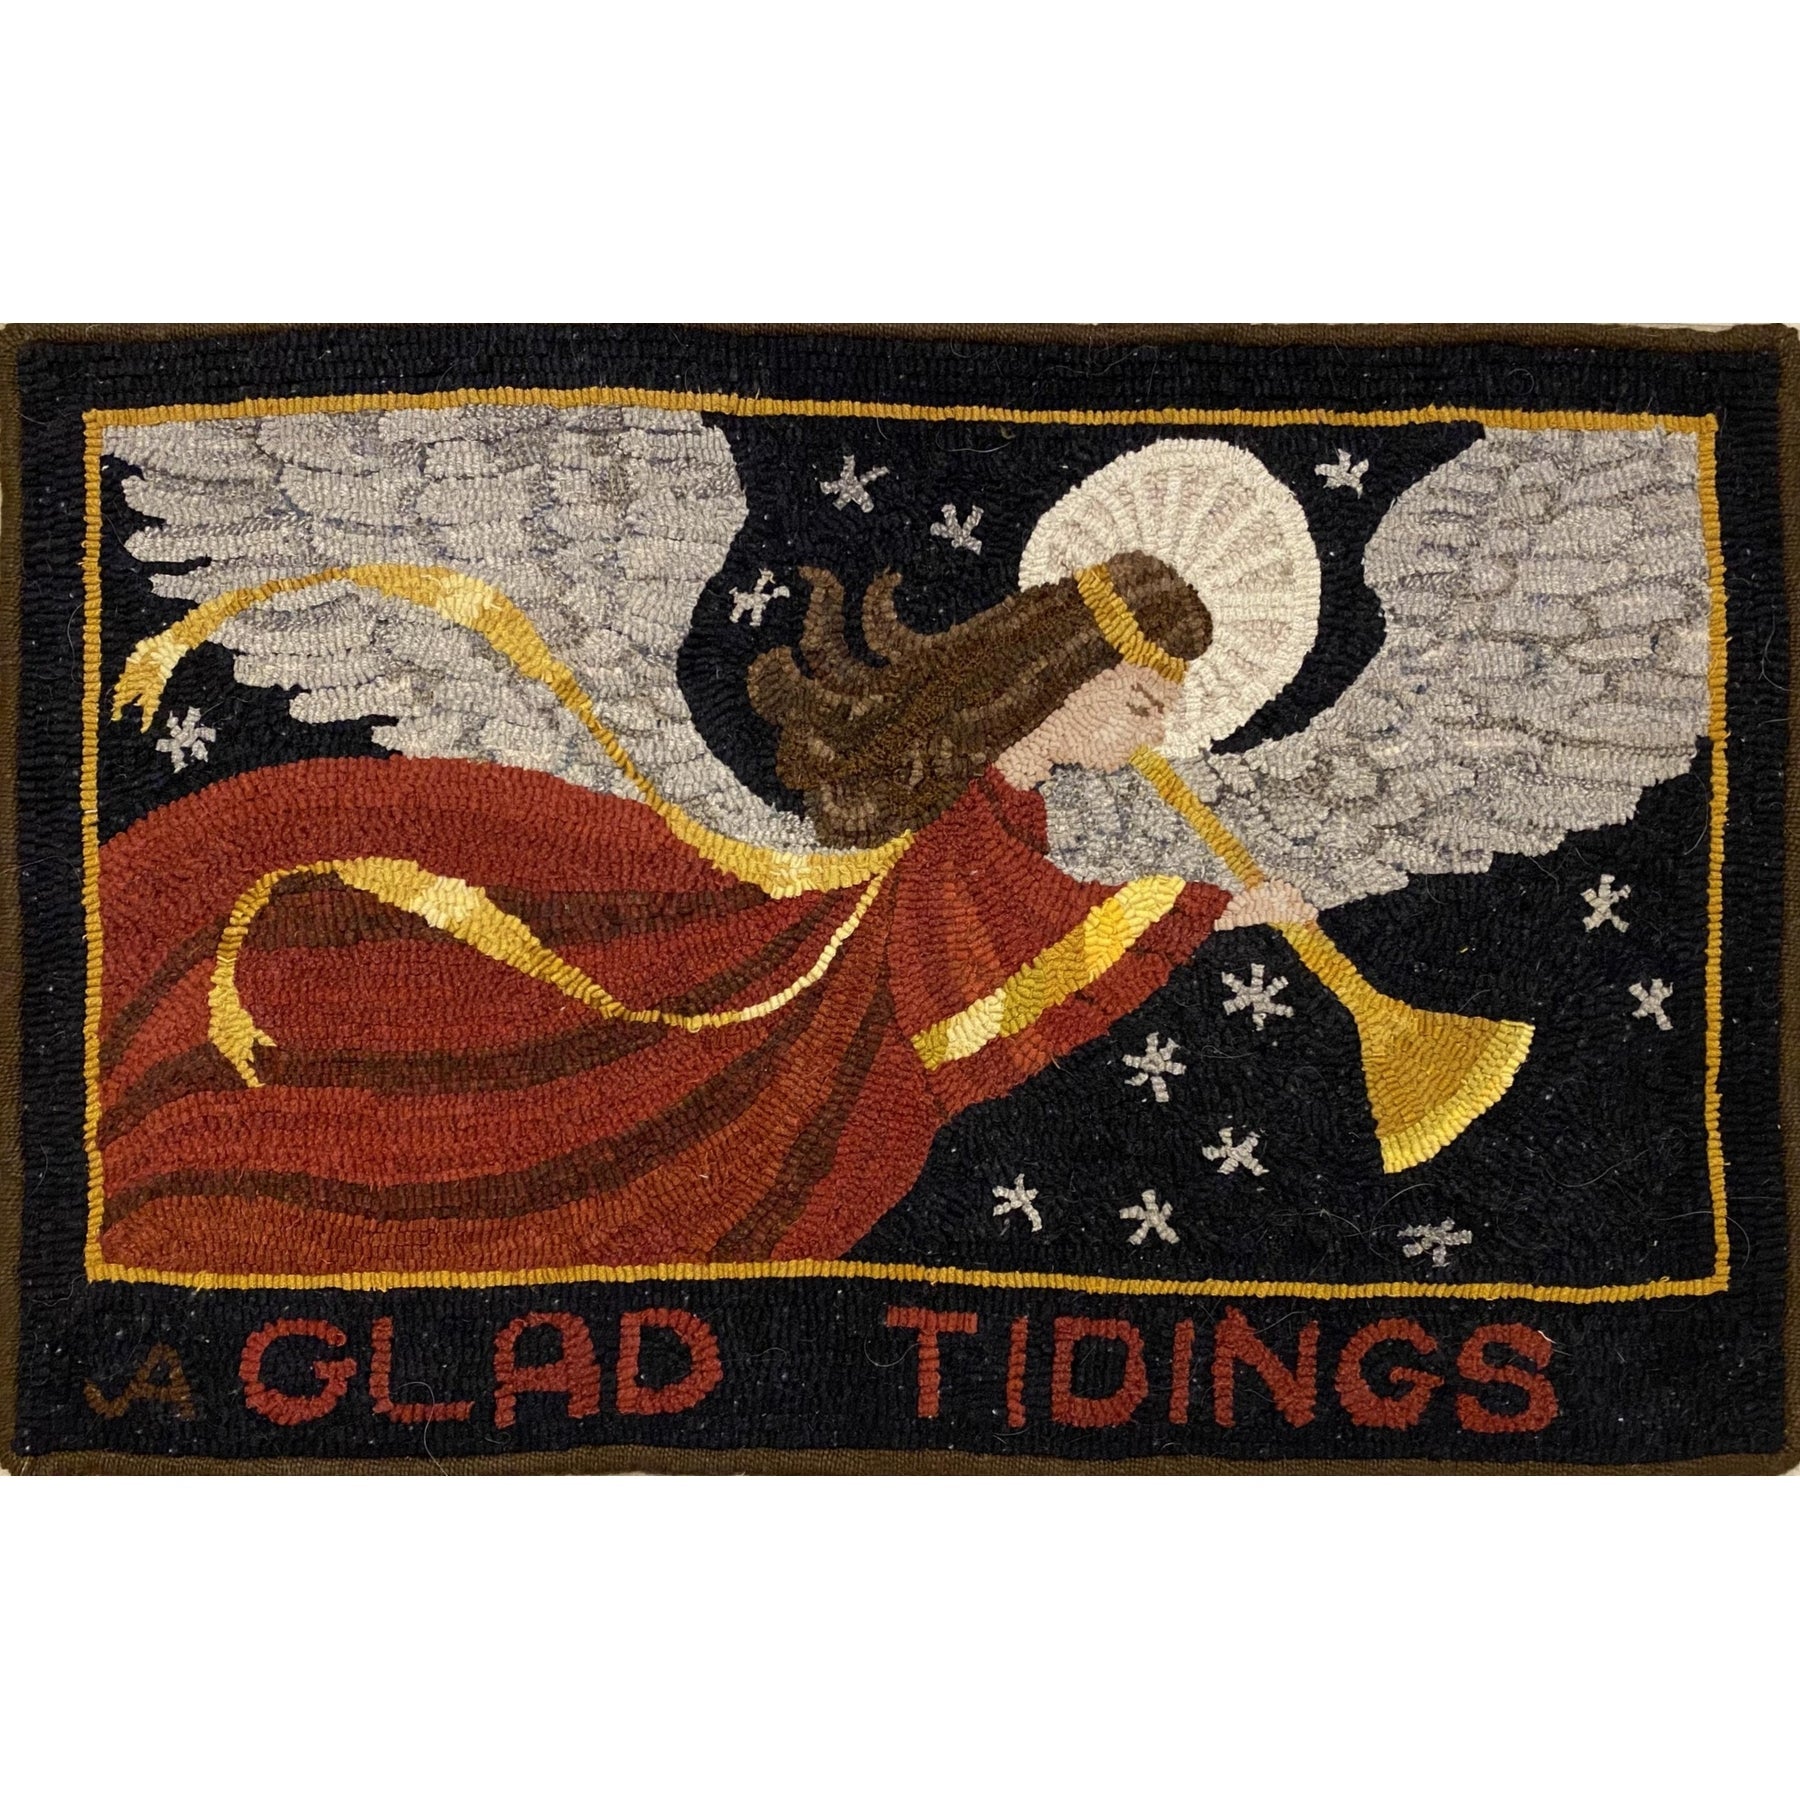 Glad Tidings, rug hooked by Jackie Albrect